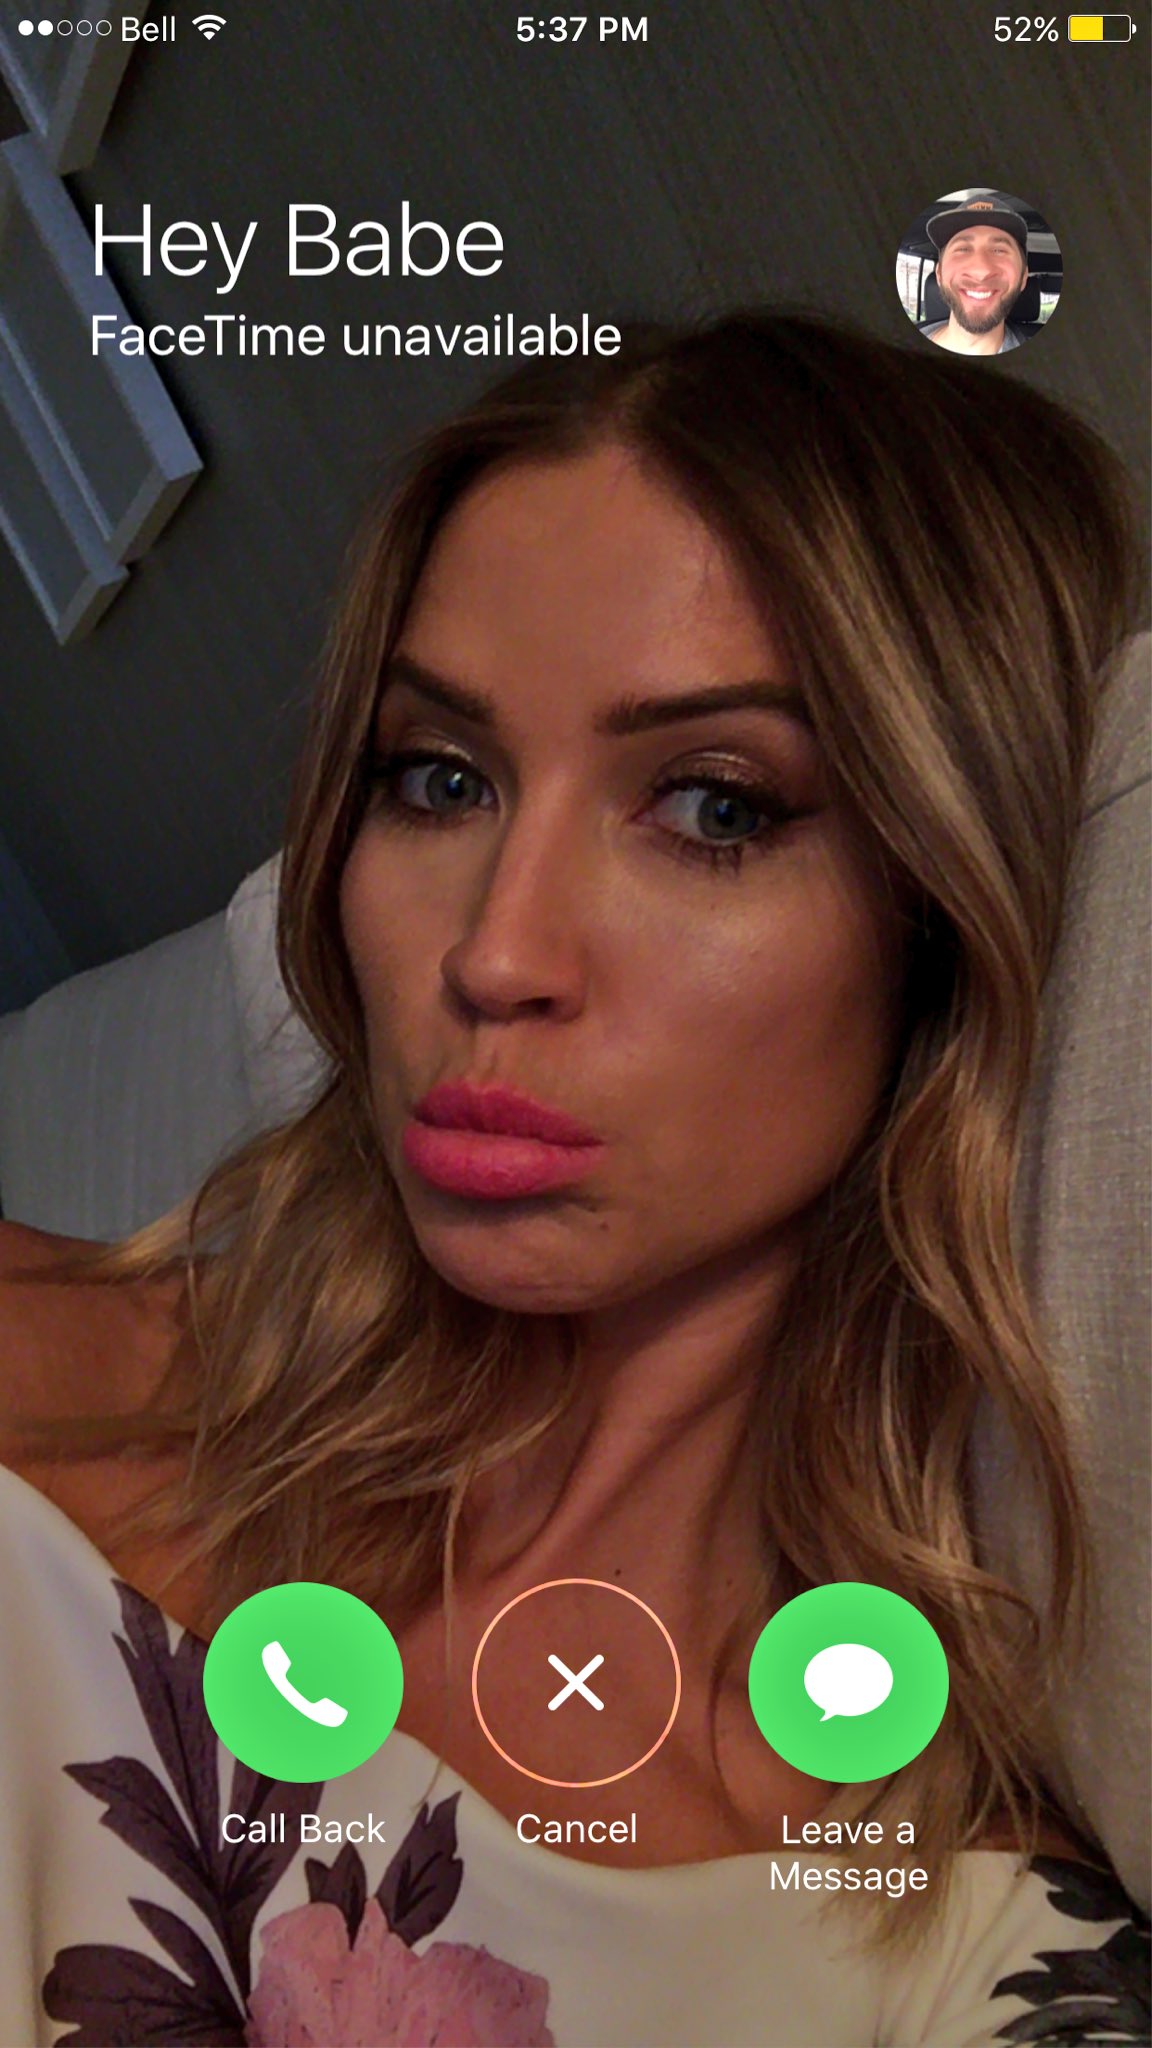 nofilters - Kaitlyn Bristowe - Shawn Booth - Fan Forum - General Discussion - #5 - Page 63 Cvzh7x4UsAAbKxI